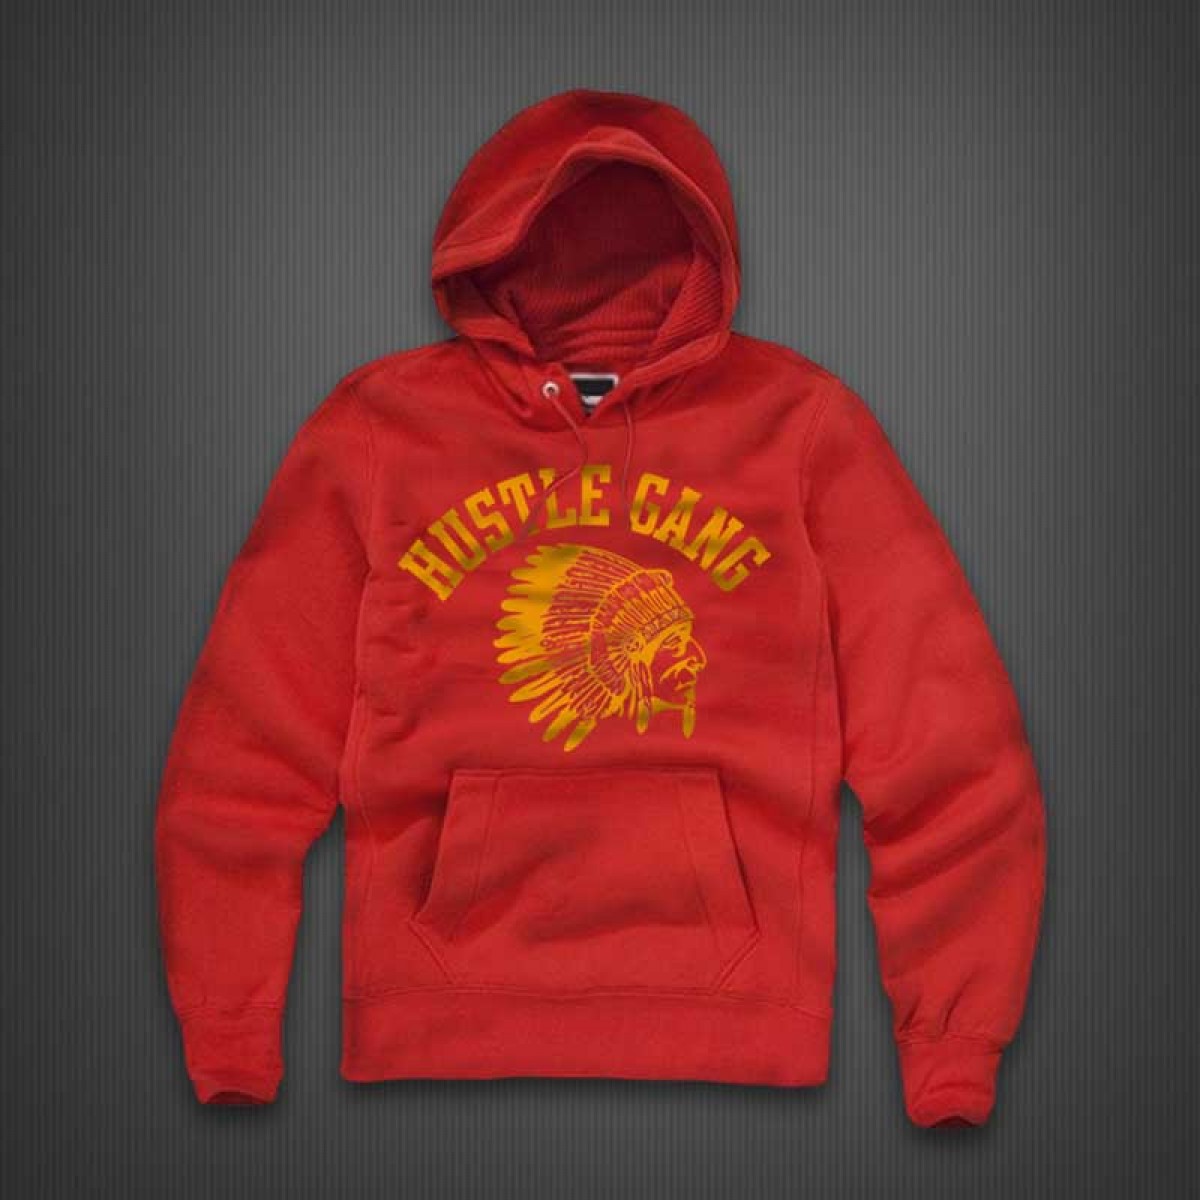 Taylor Gang Over Everything Hoodie Taylor gang over everything